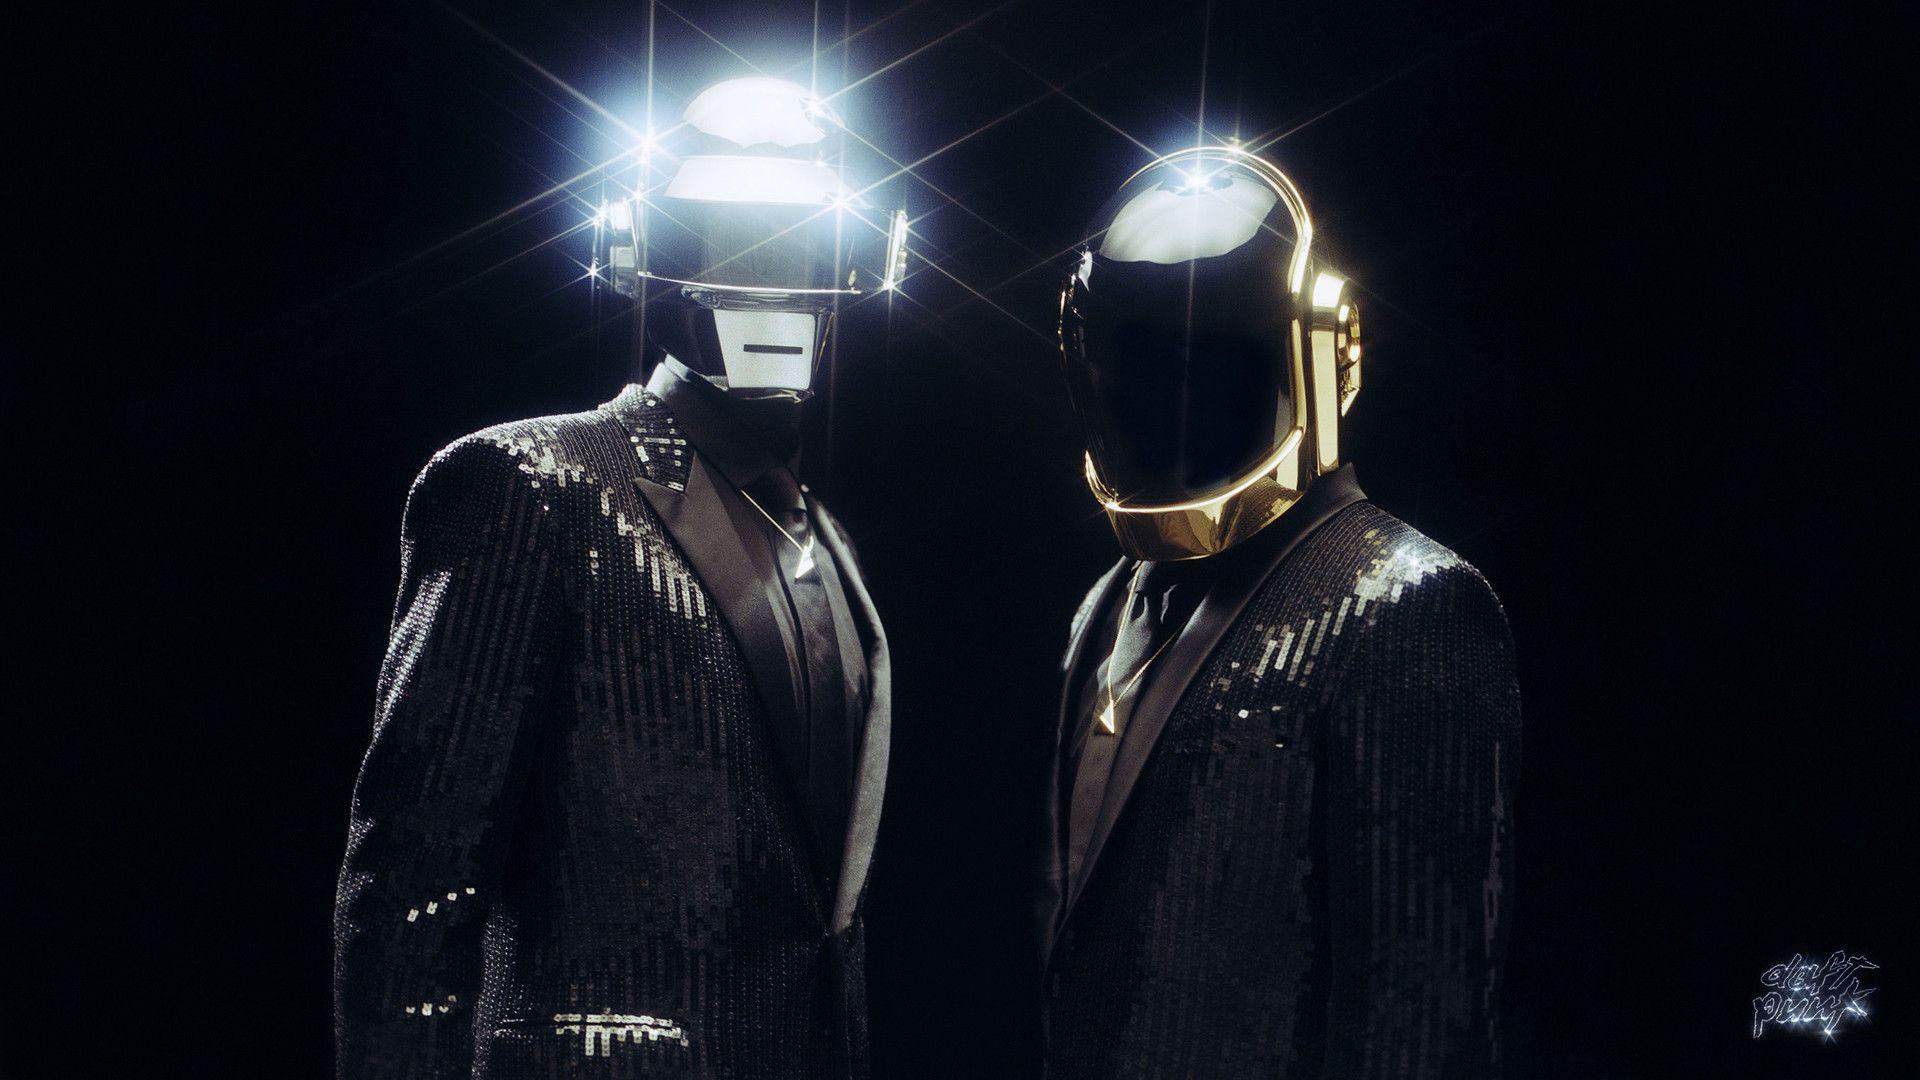 Wallpapers For > Daft Punk Wallpapers Hd 1920x1080